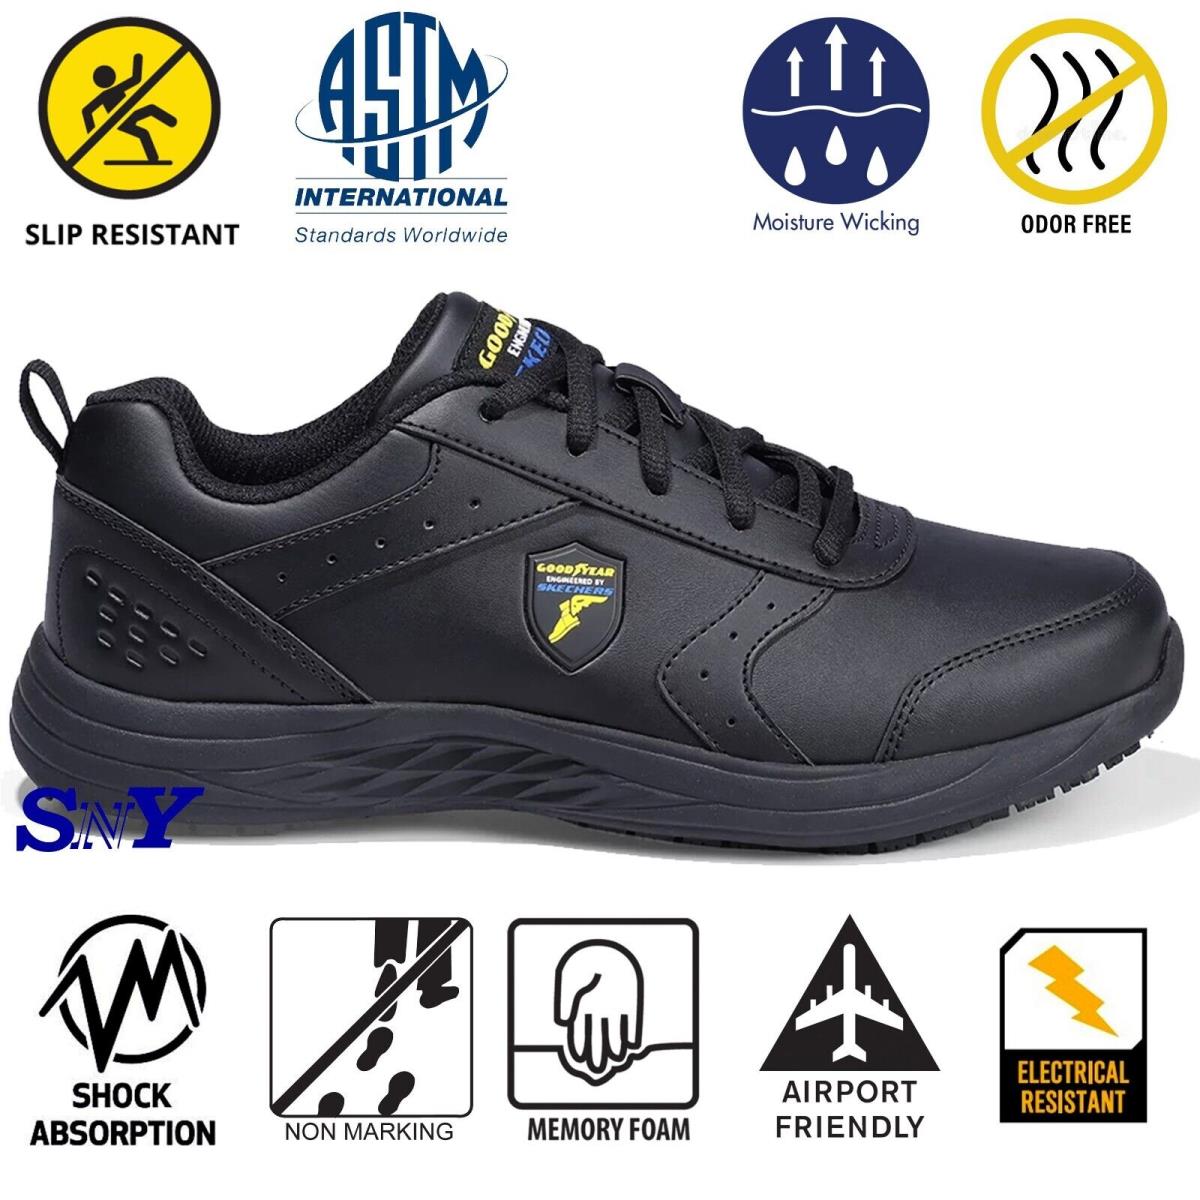 Skechers Goodyear Women`s Slip-resistant Lightweight Service Shoes Astm Rated